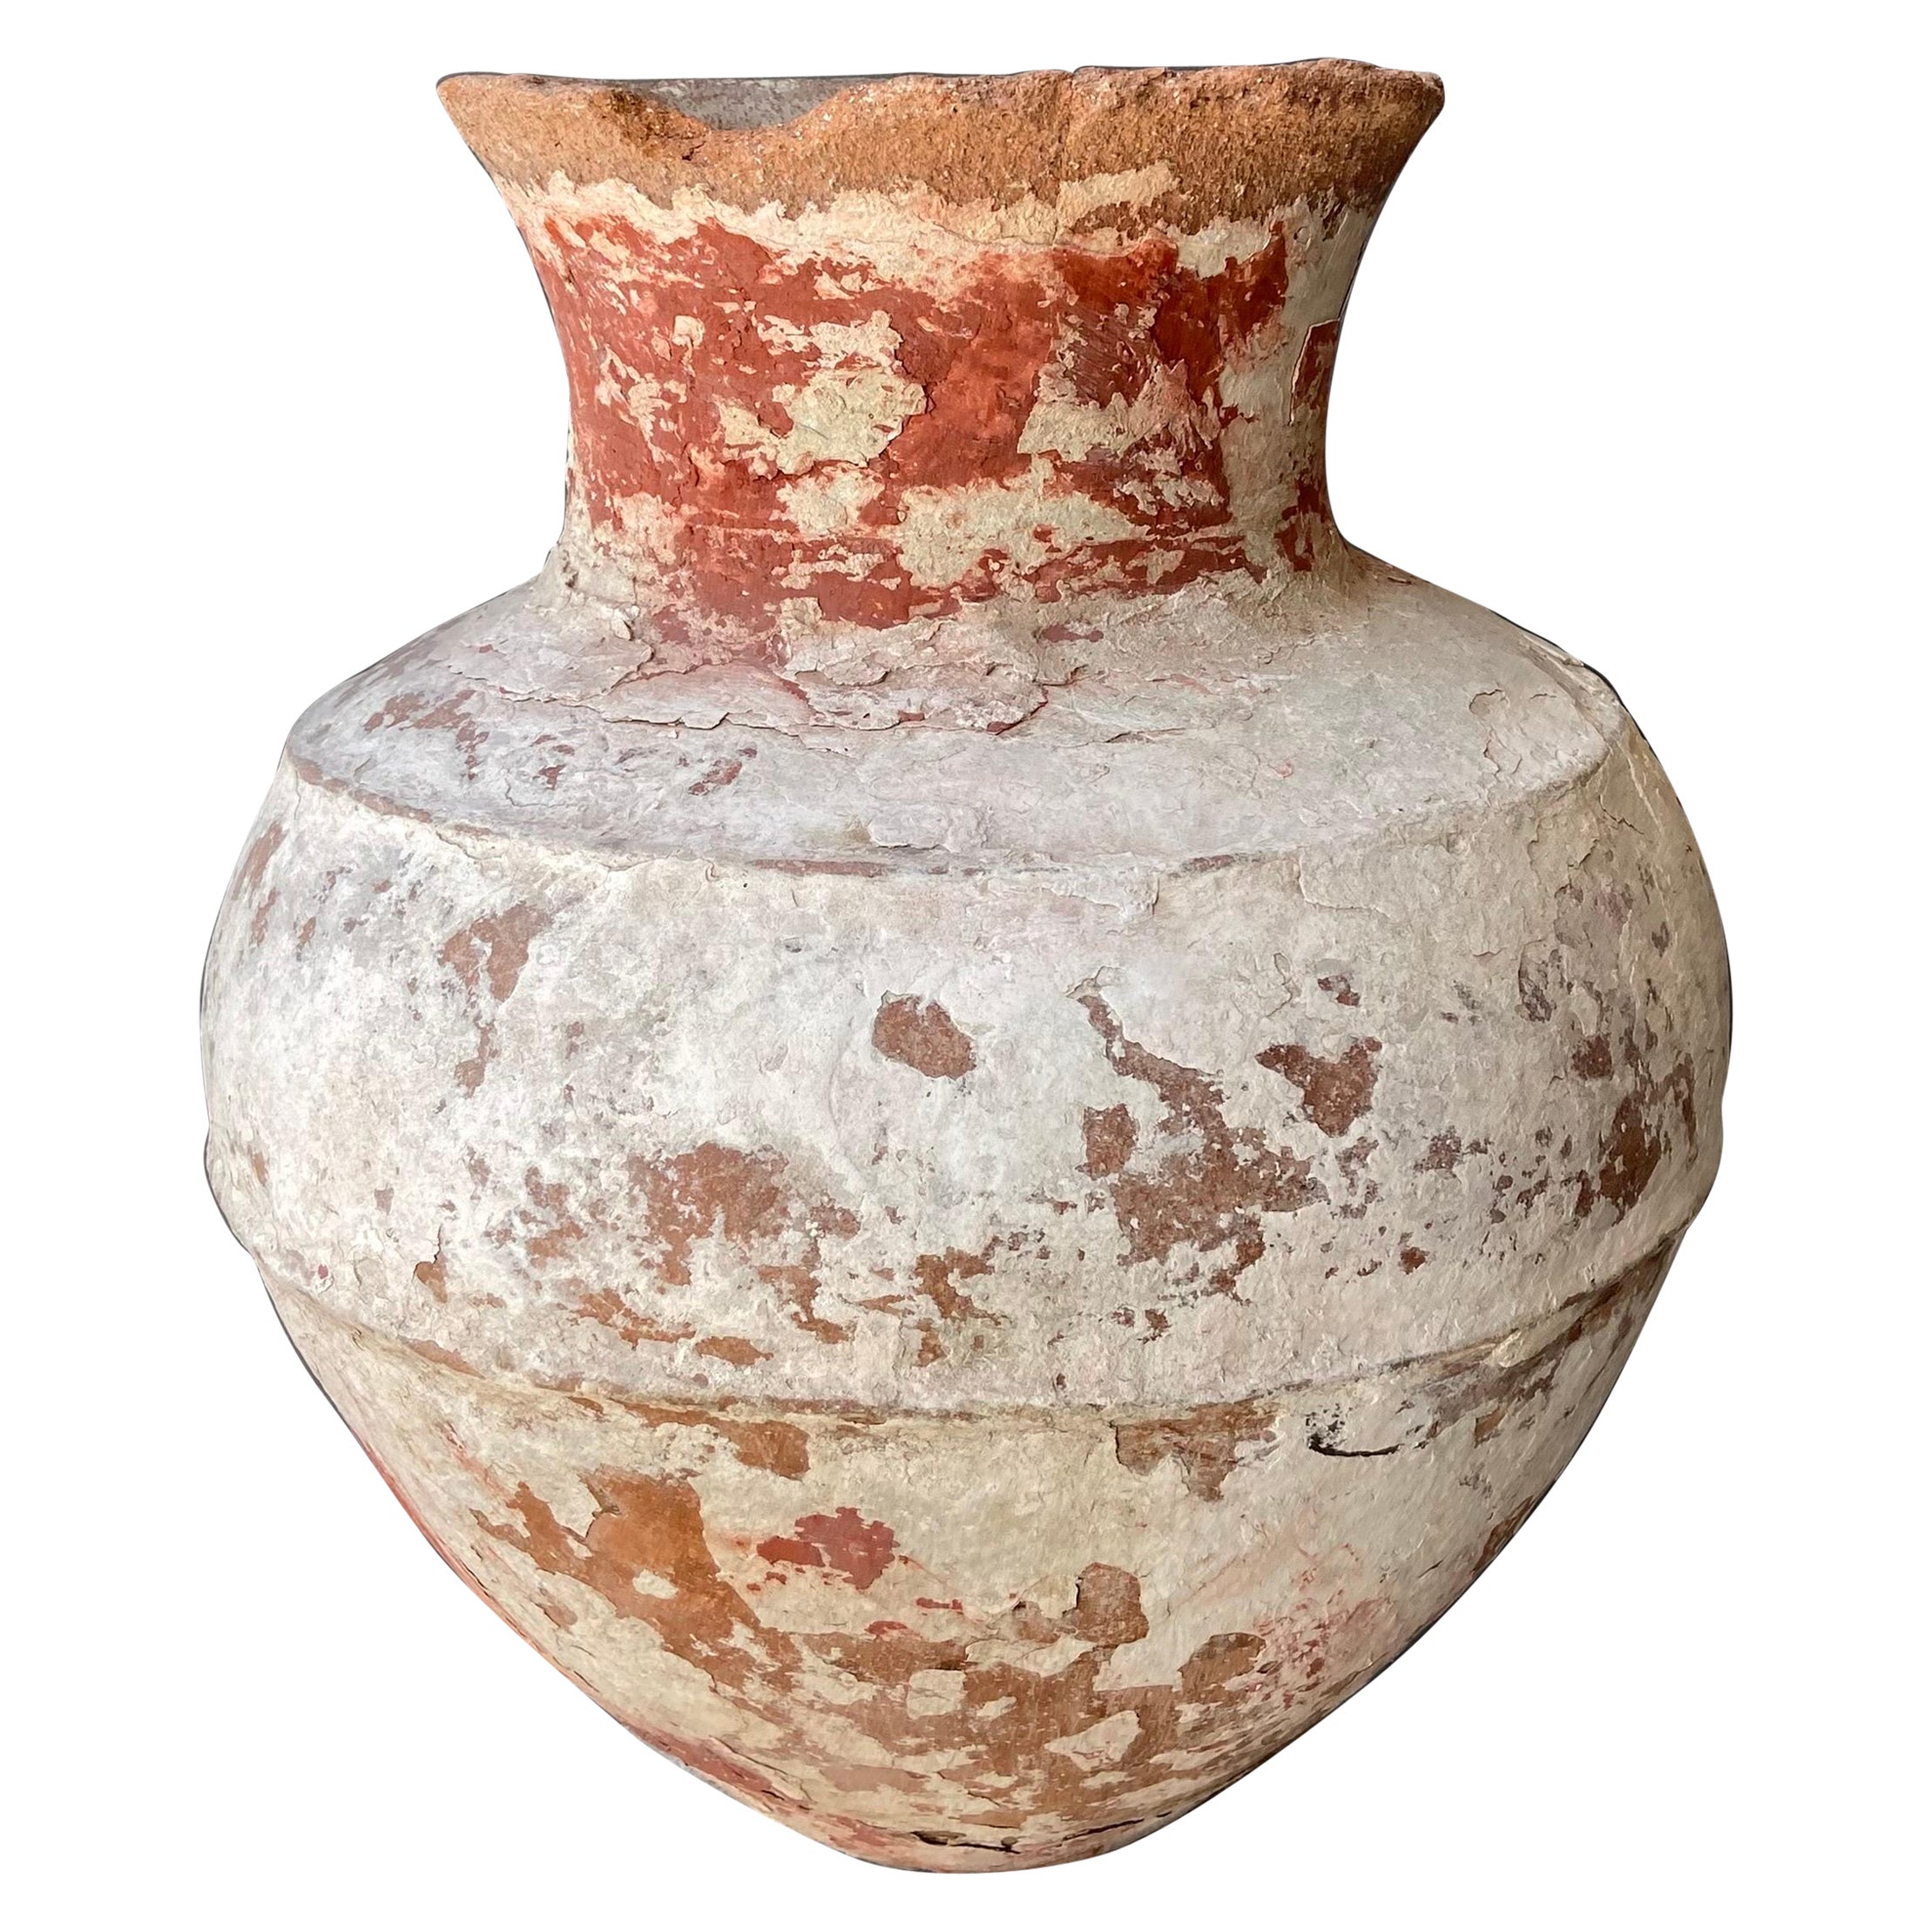 Ceramic Water Vessel from Yucatan, circa Early 20th Century